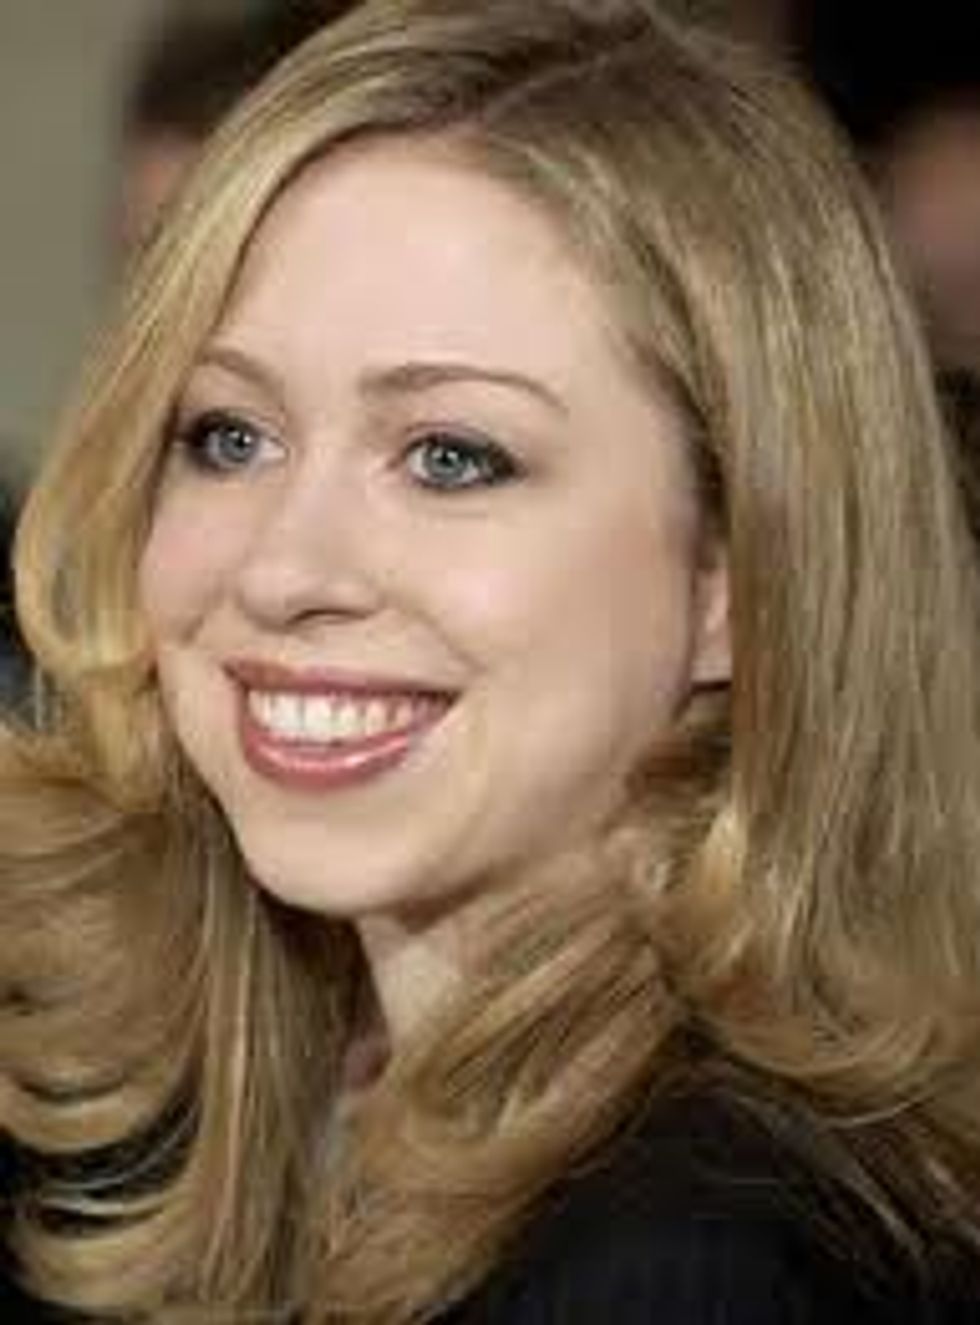 Class War Has A Fresh New Face: Chelsea Clinton And Her $10.5 Million NYC Pad